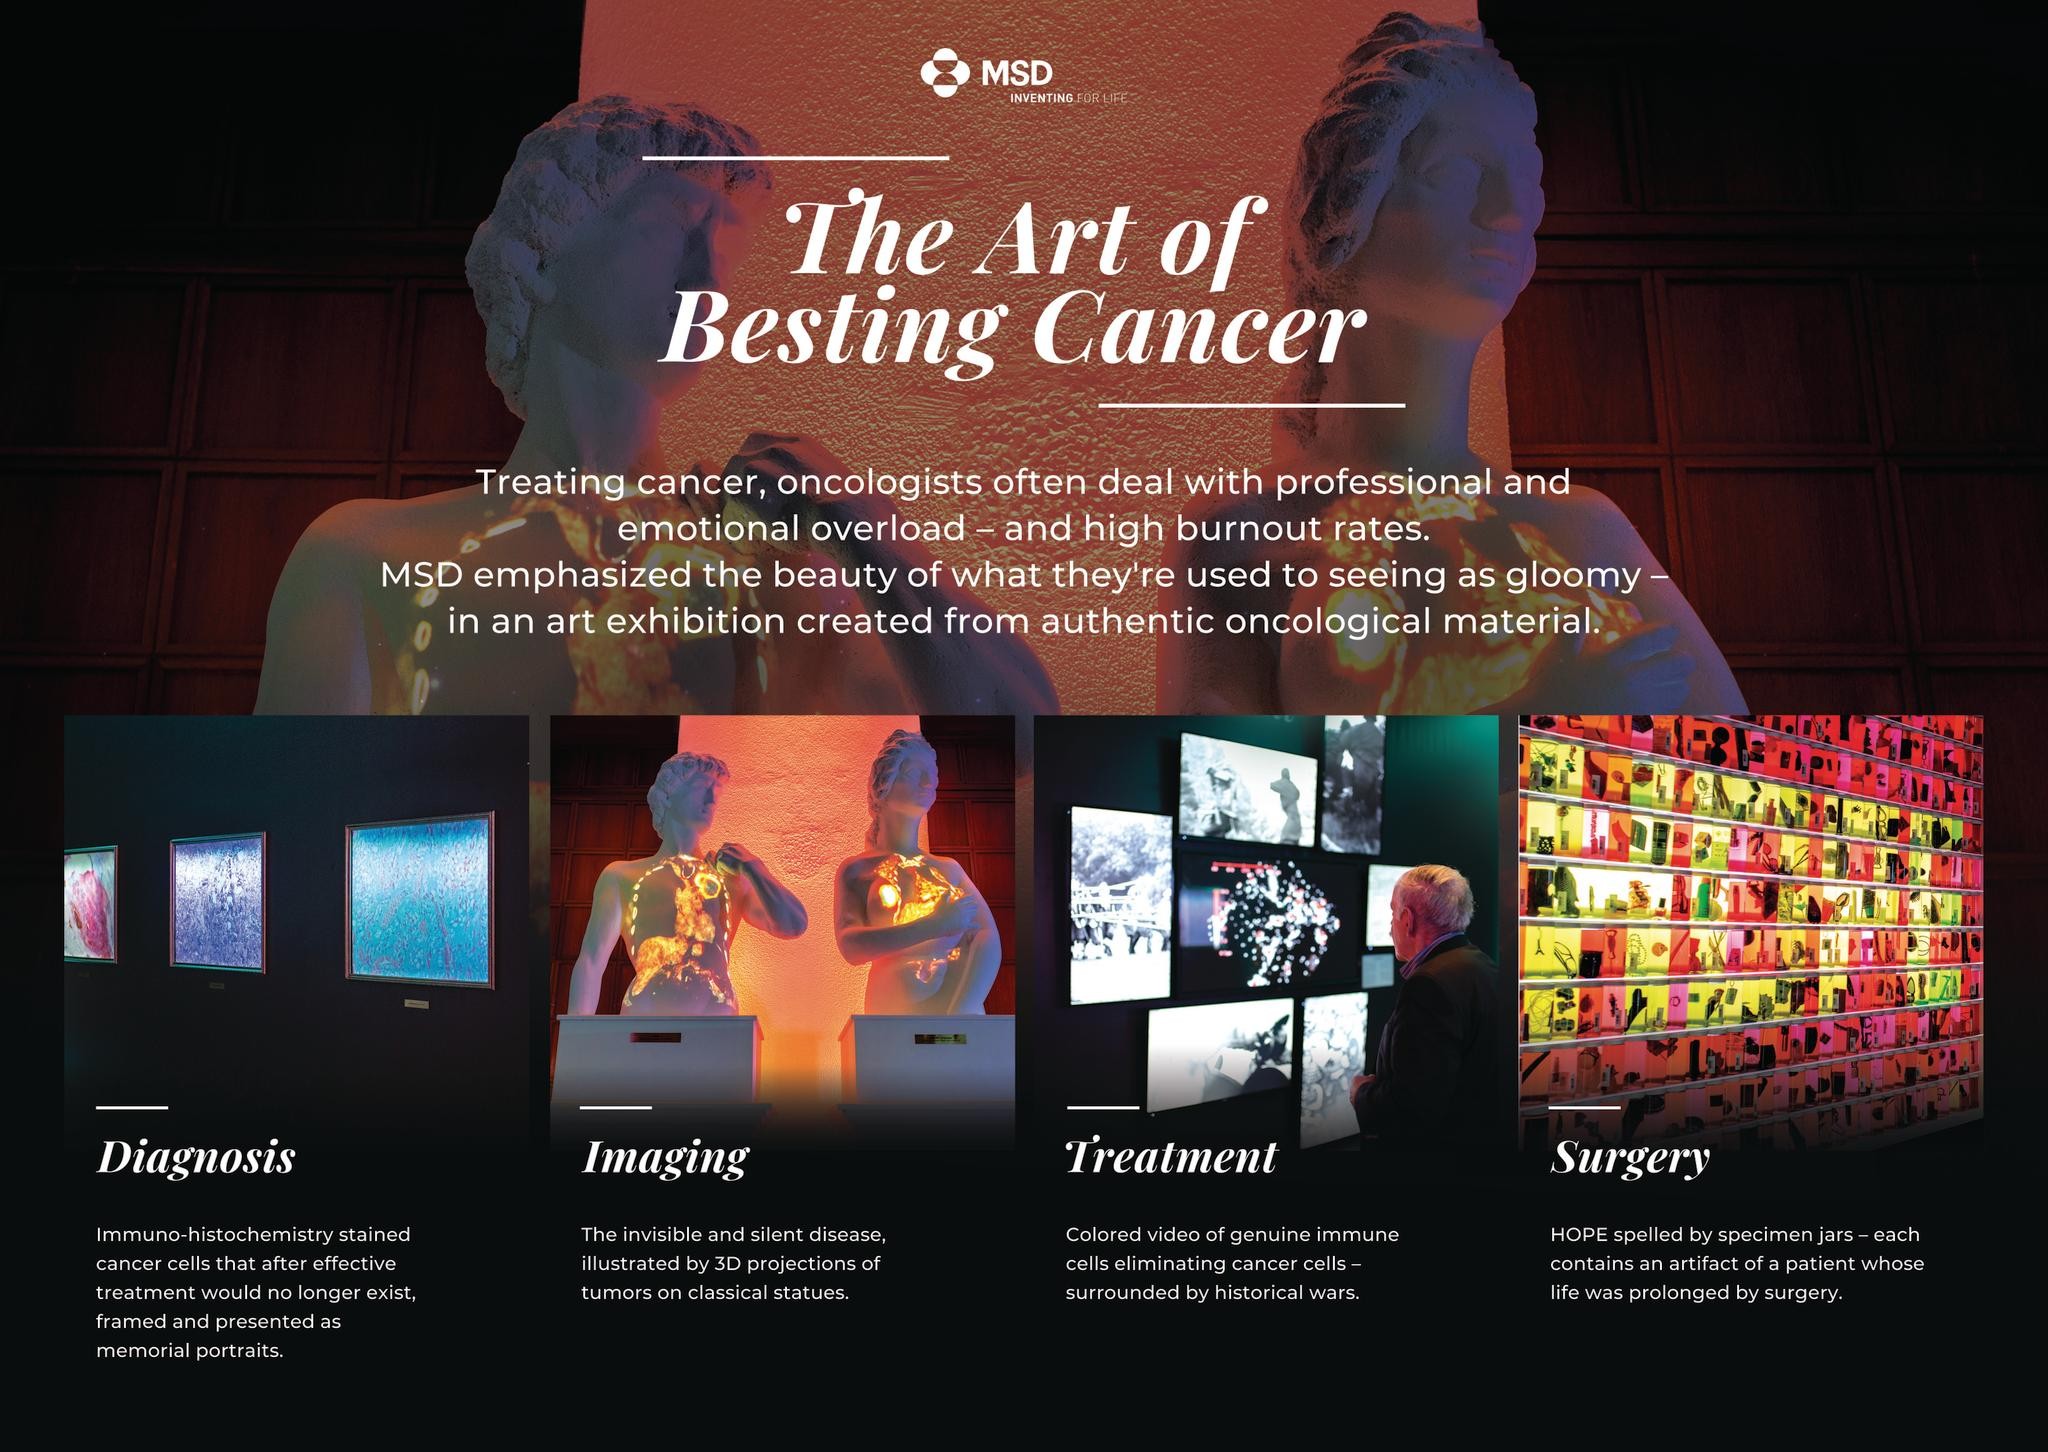 The Art of Besting Cancer